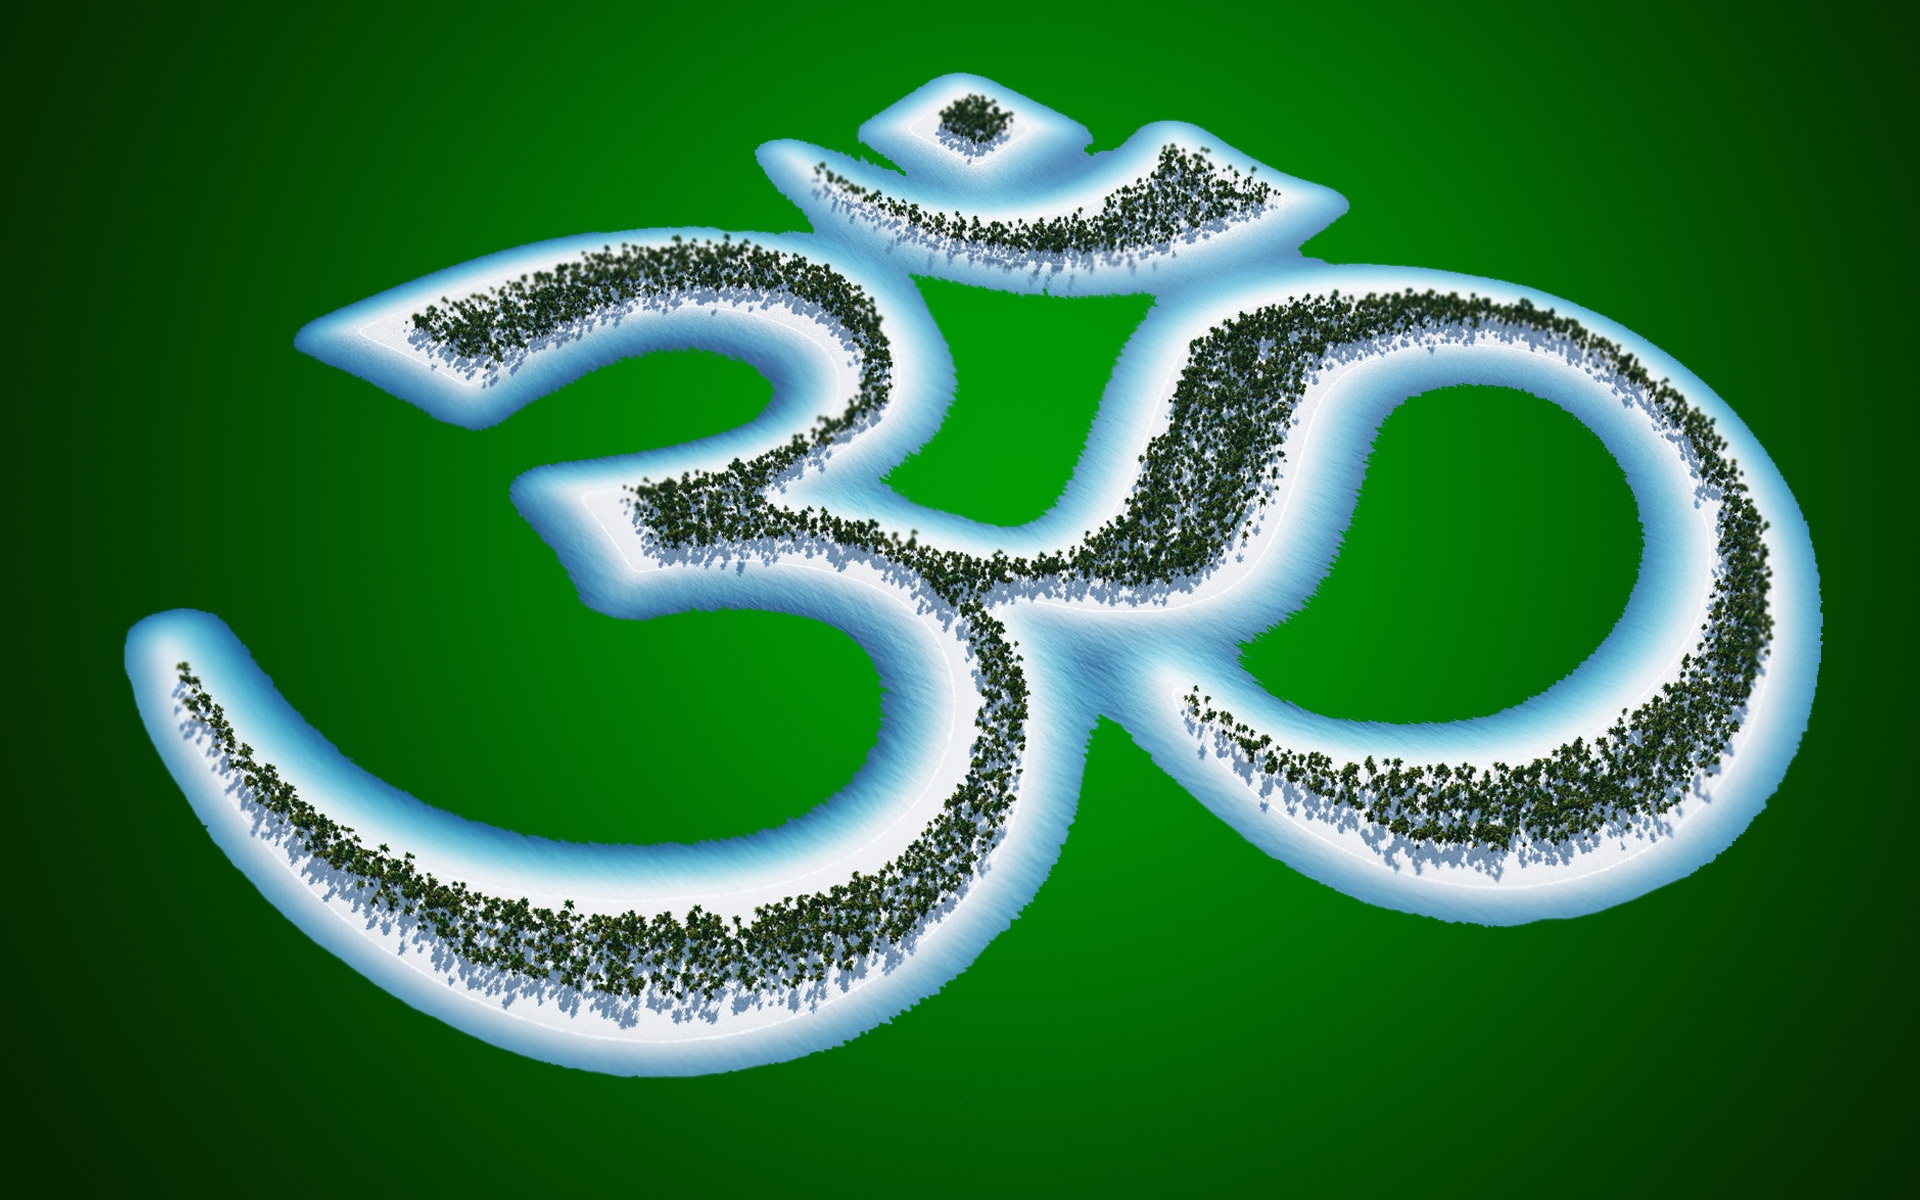 Om Swastik Wallpapers - Hd Wallpapers On Hinduism , HD Wallpaper & Backgrounds